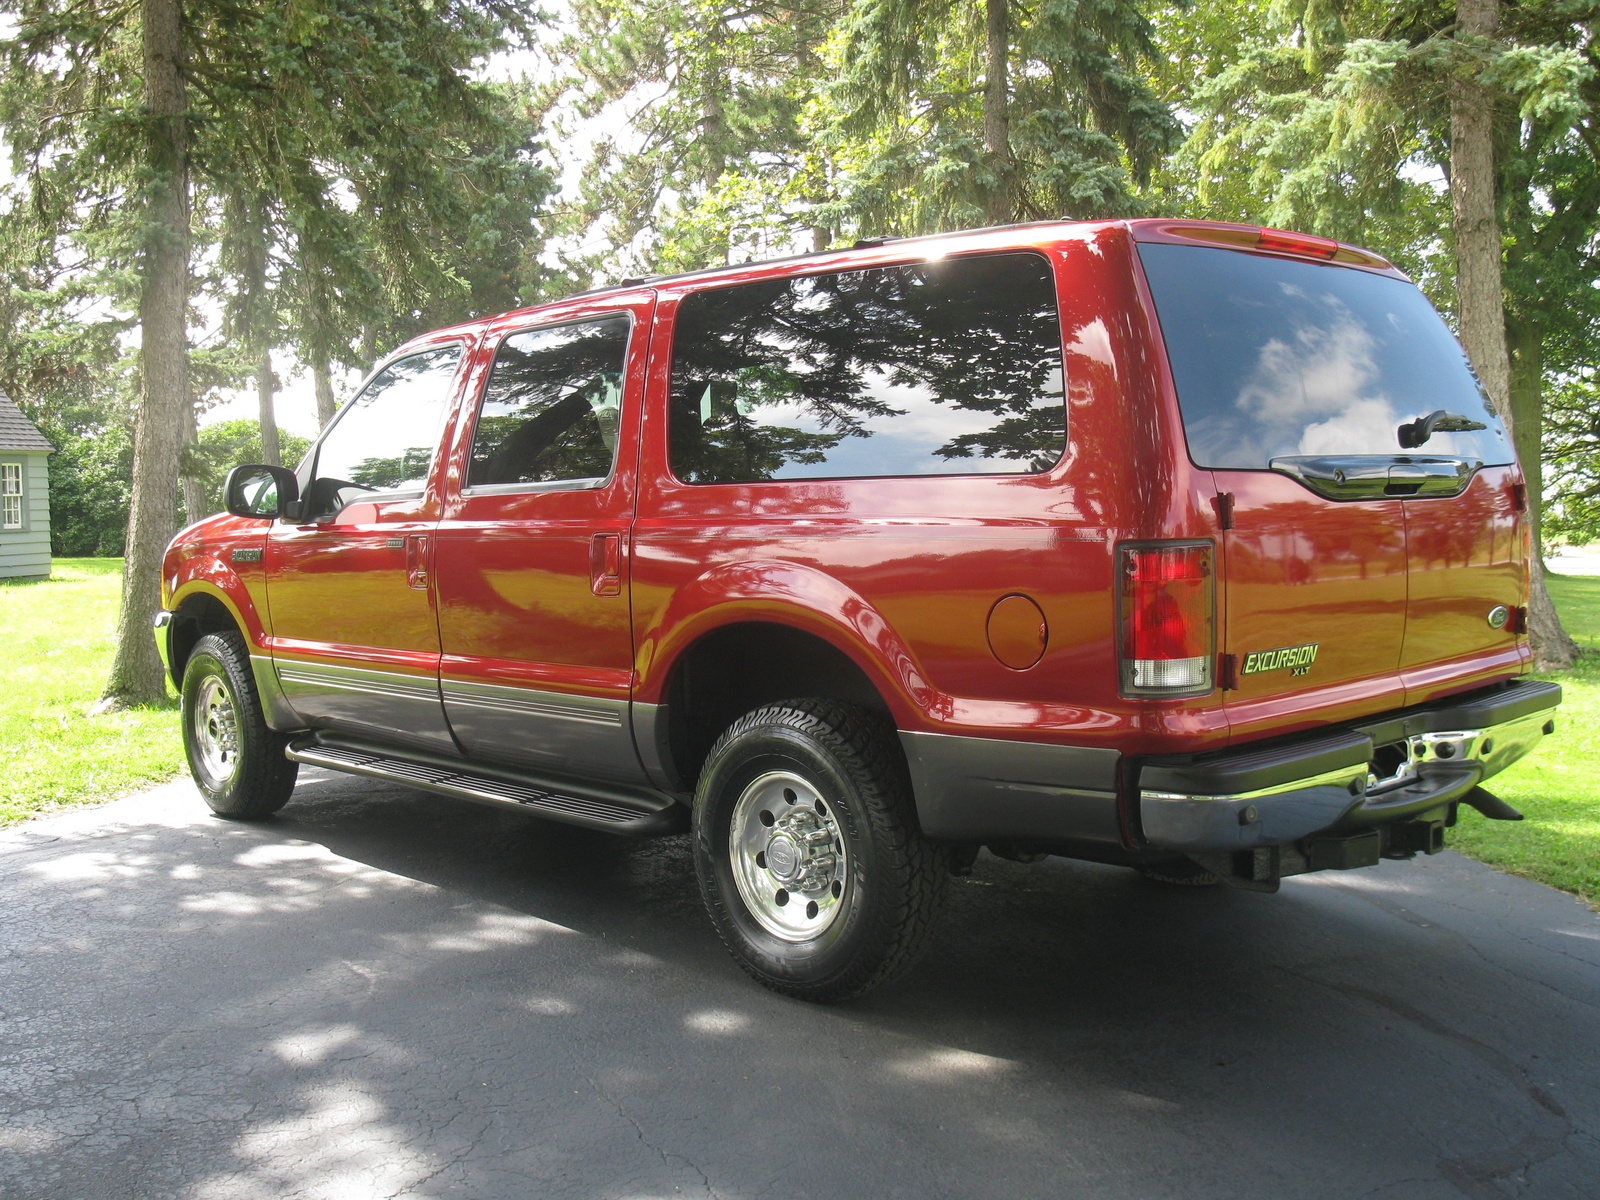 2004 Ford excursion limited reviews #2